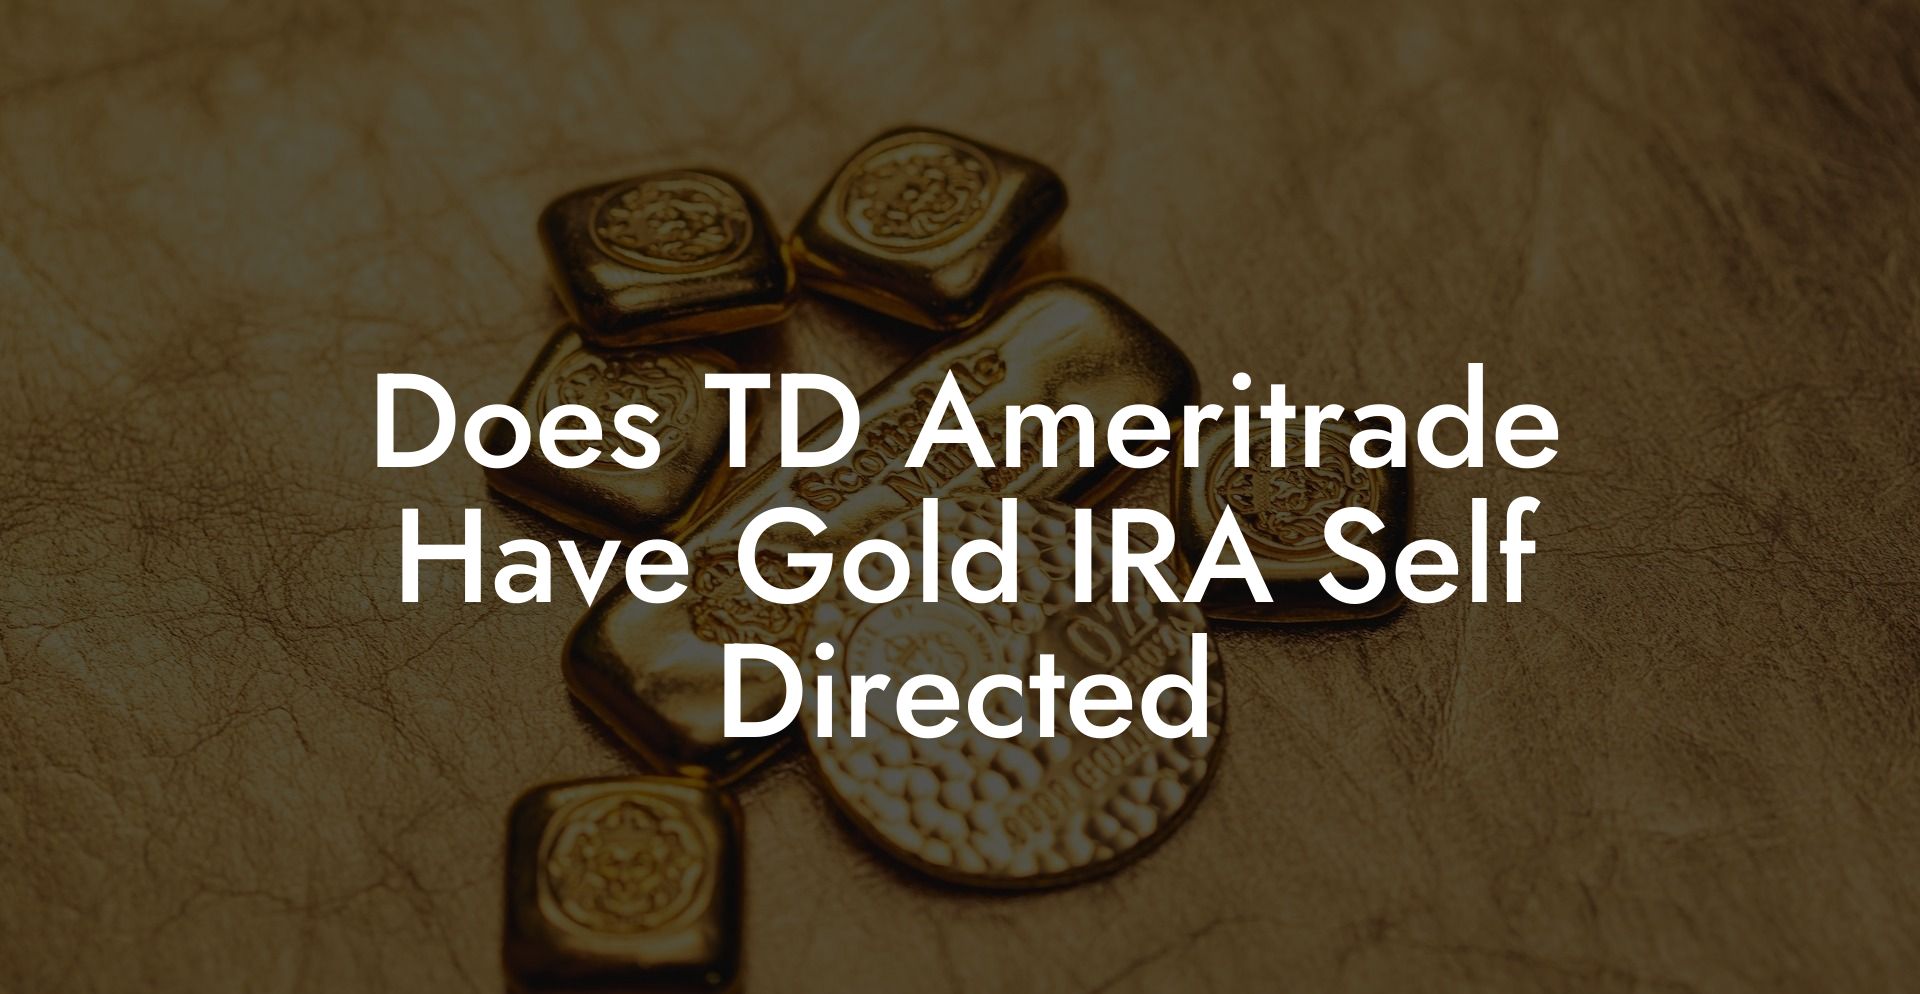 Does TD Ameritrade Have Gold IRA Self Directed